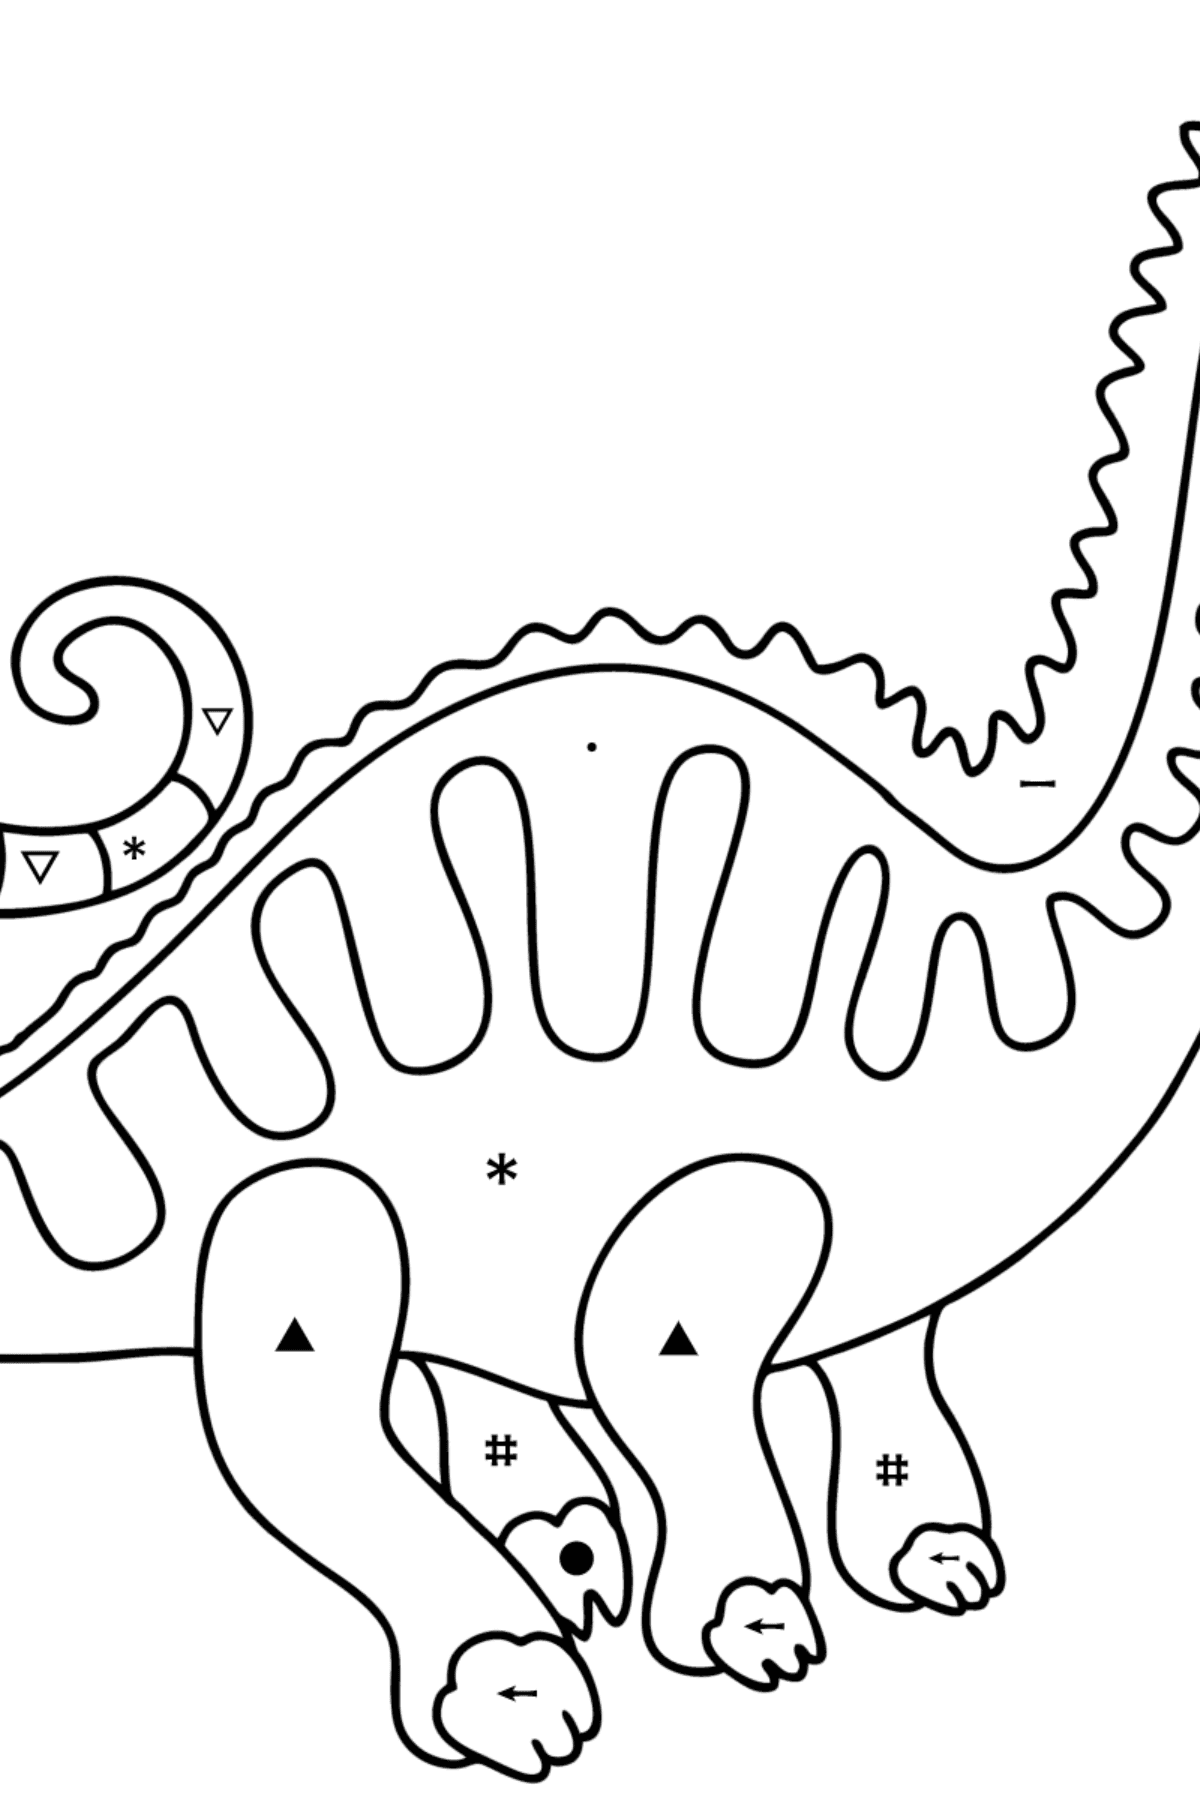 Apatosaurus coloring page - Coloring by Symbols for Kids